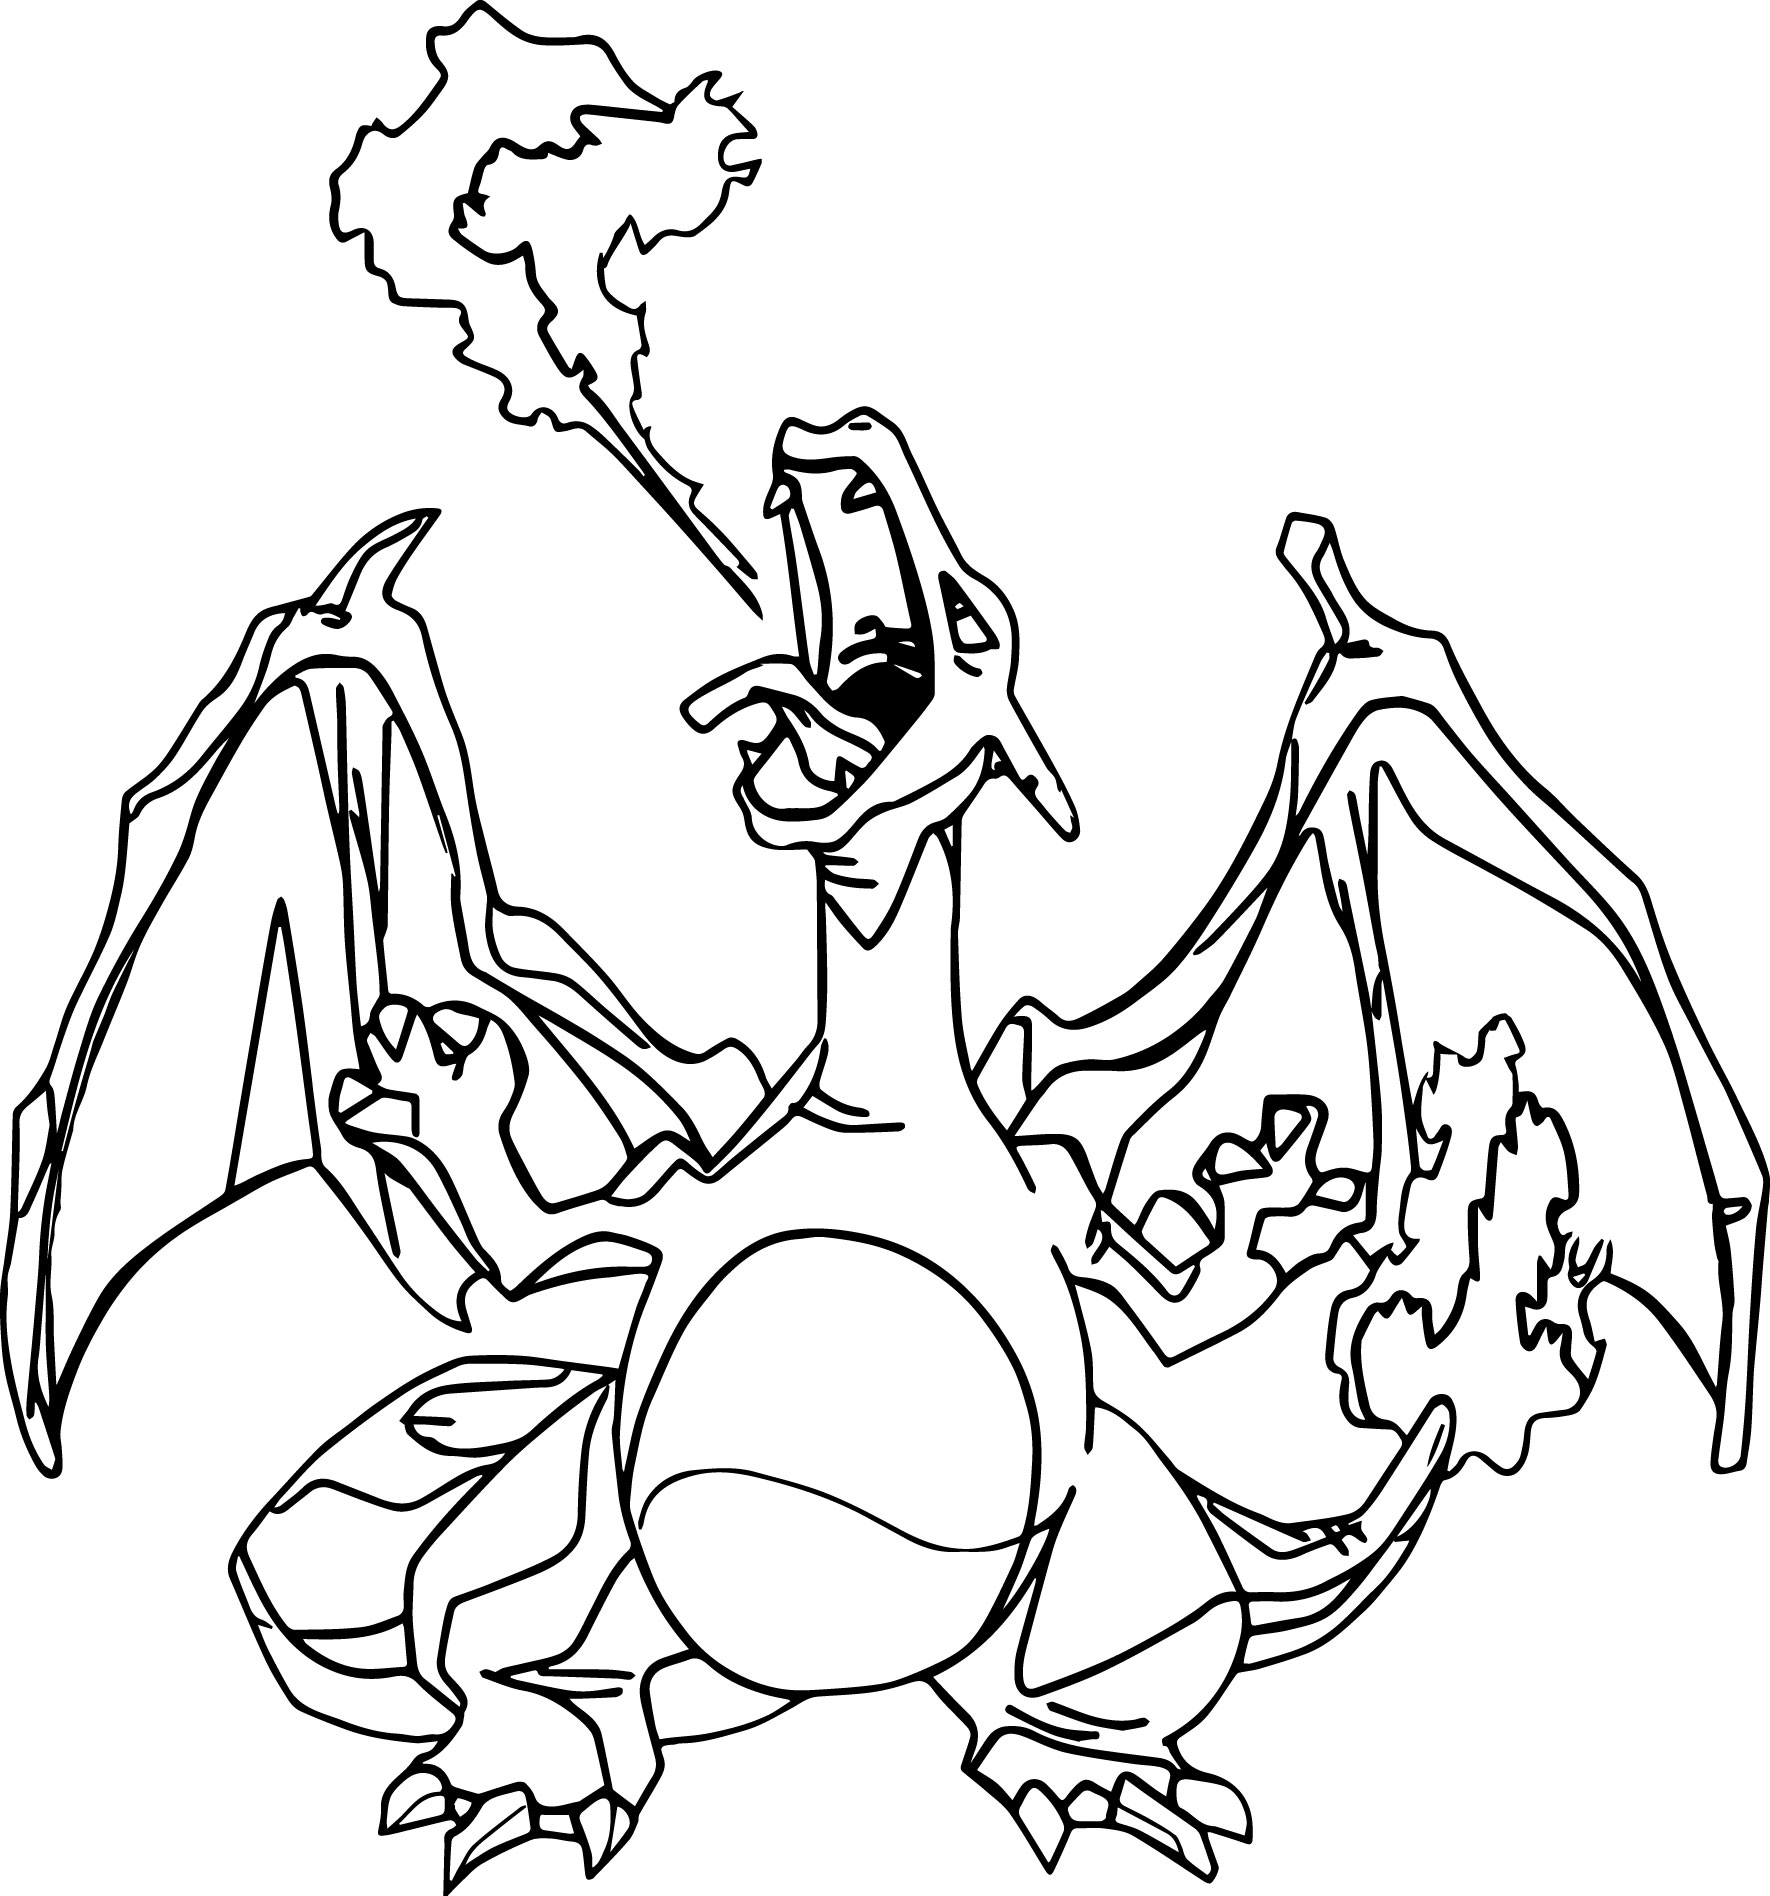 Printable Charizard Coloring Pages - Pokemon Charizard Coloring Pages